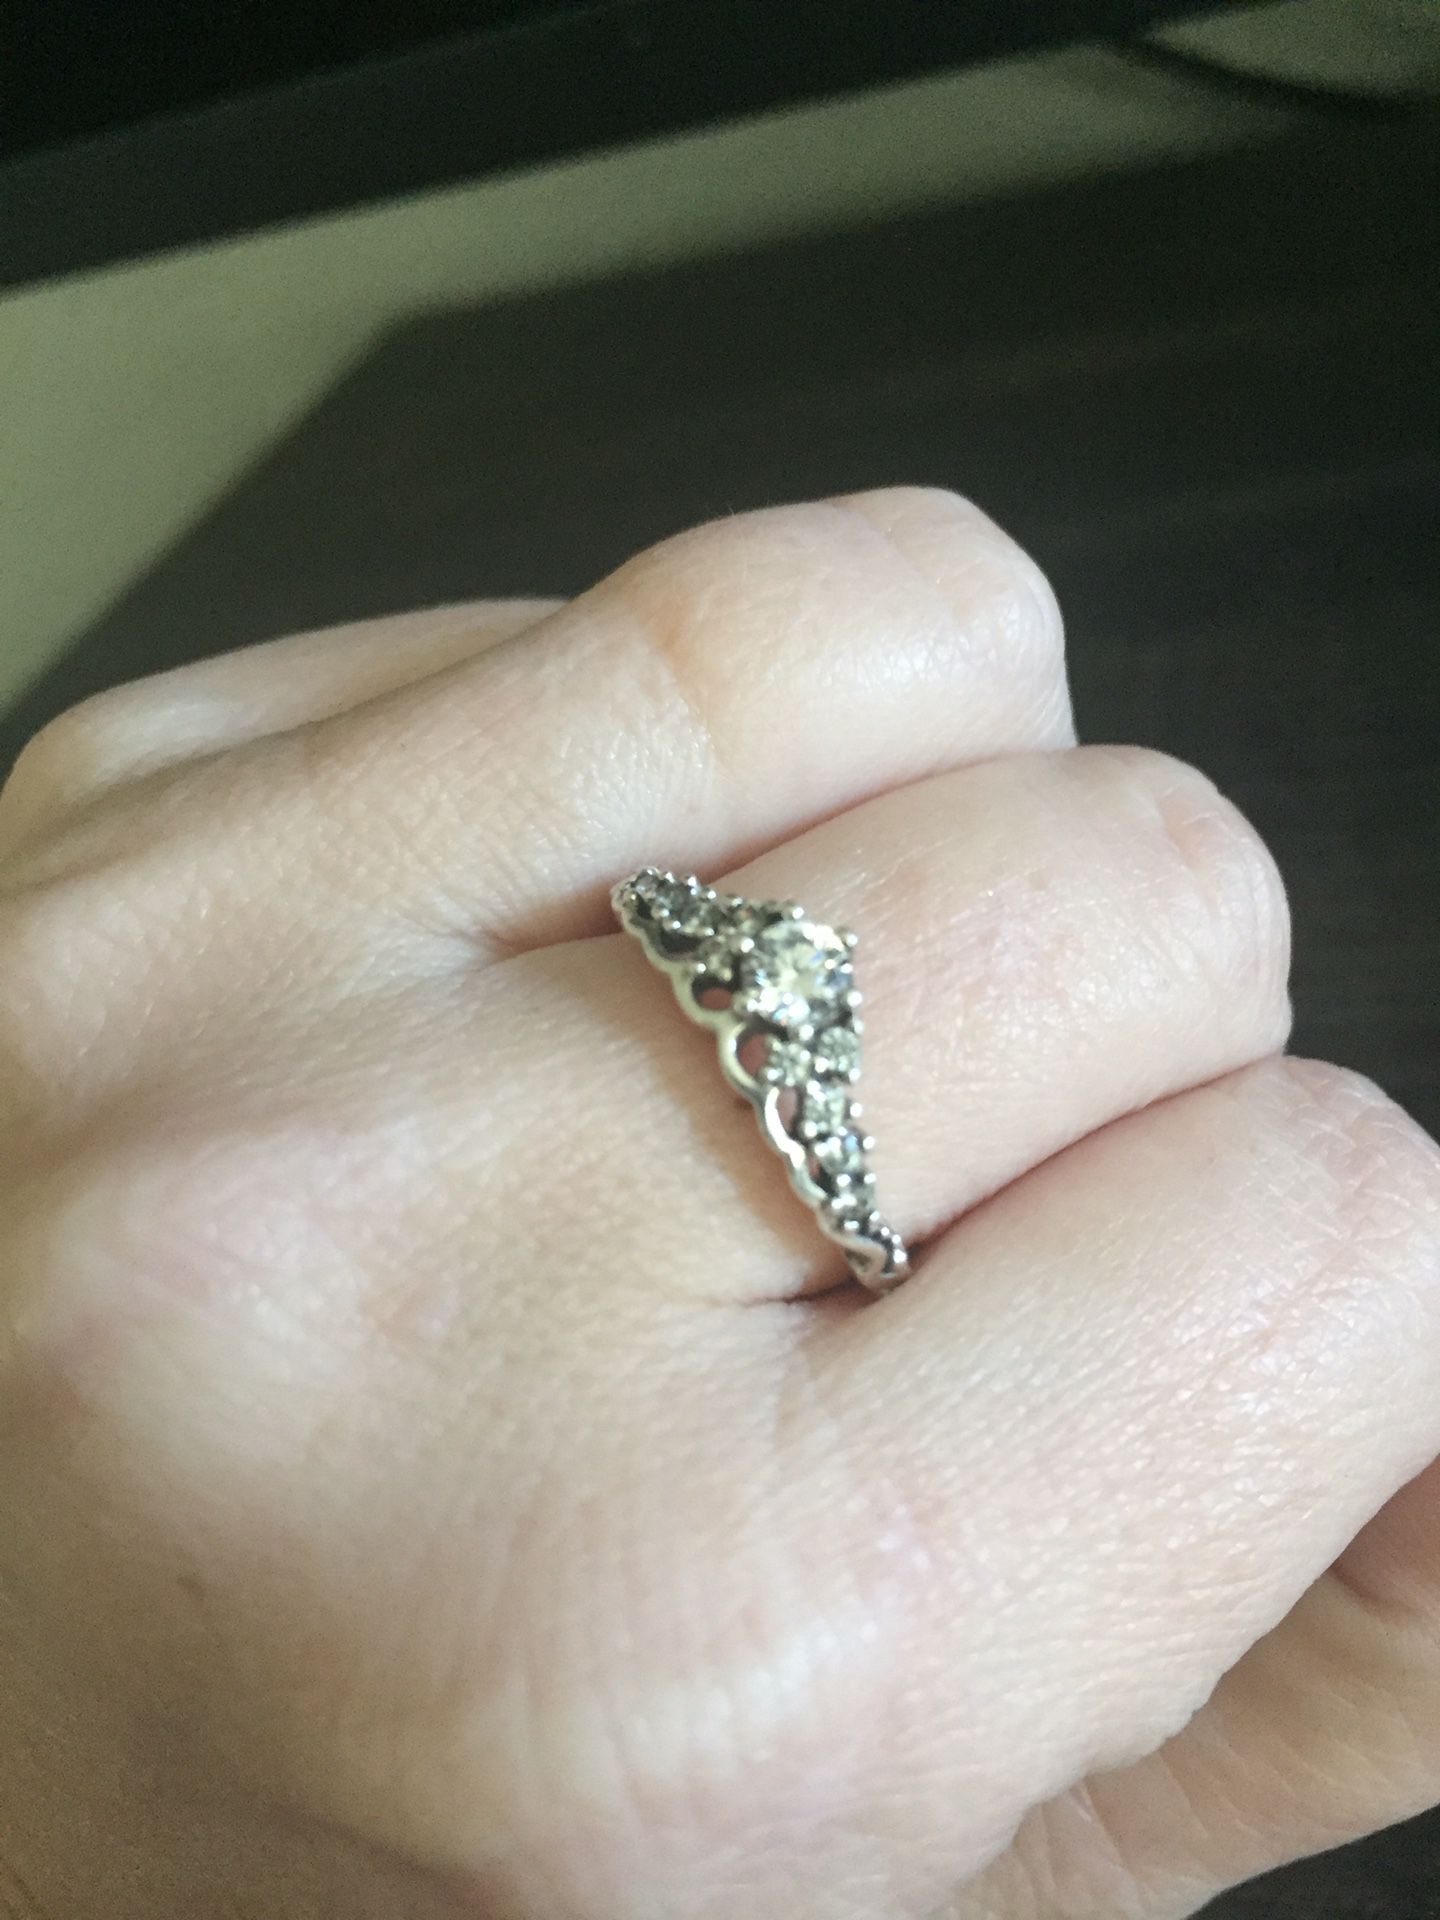 Pandora fairytale tiara ring. Approx size 7. for Sale in Tampa, FL